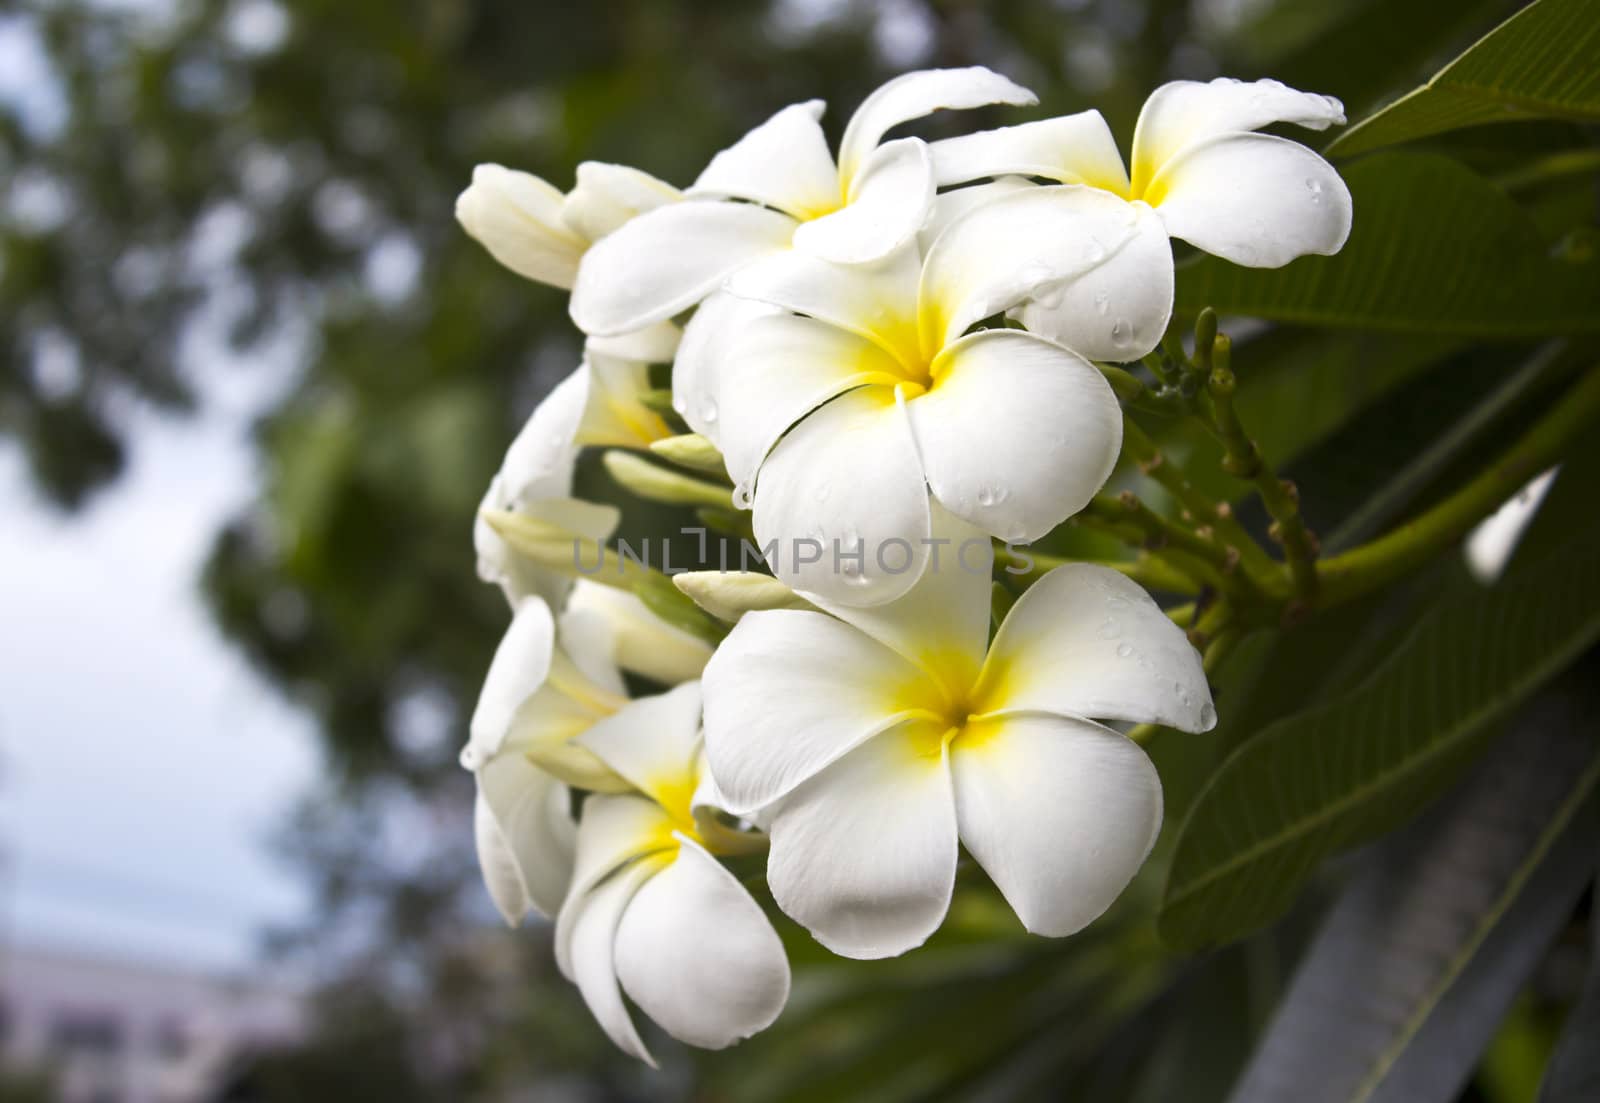 Branch of tropical flowers frangipani (plumeria) for Spa & aromatherapy concept